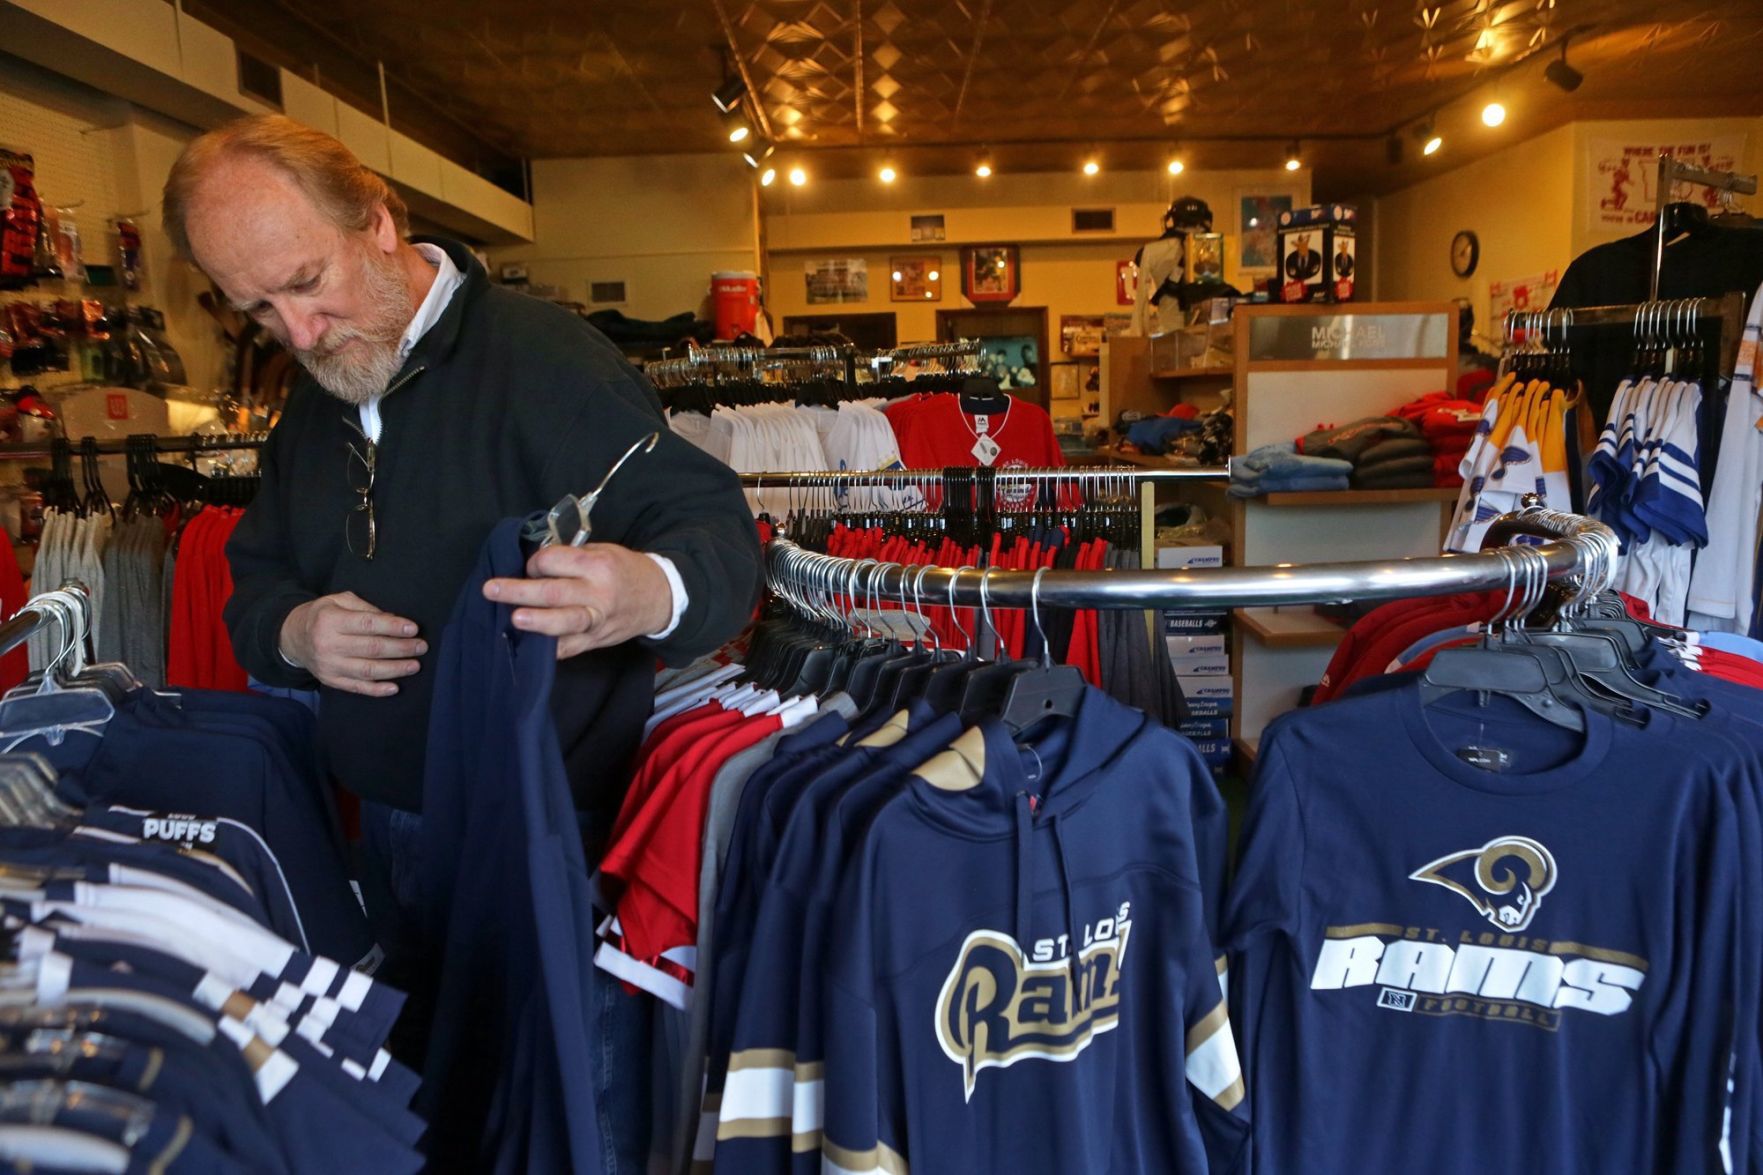 Did you buy St. Louis Rams gear before 